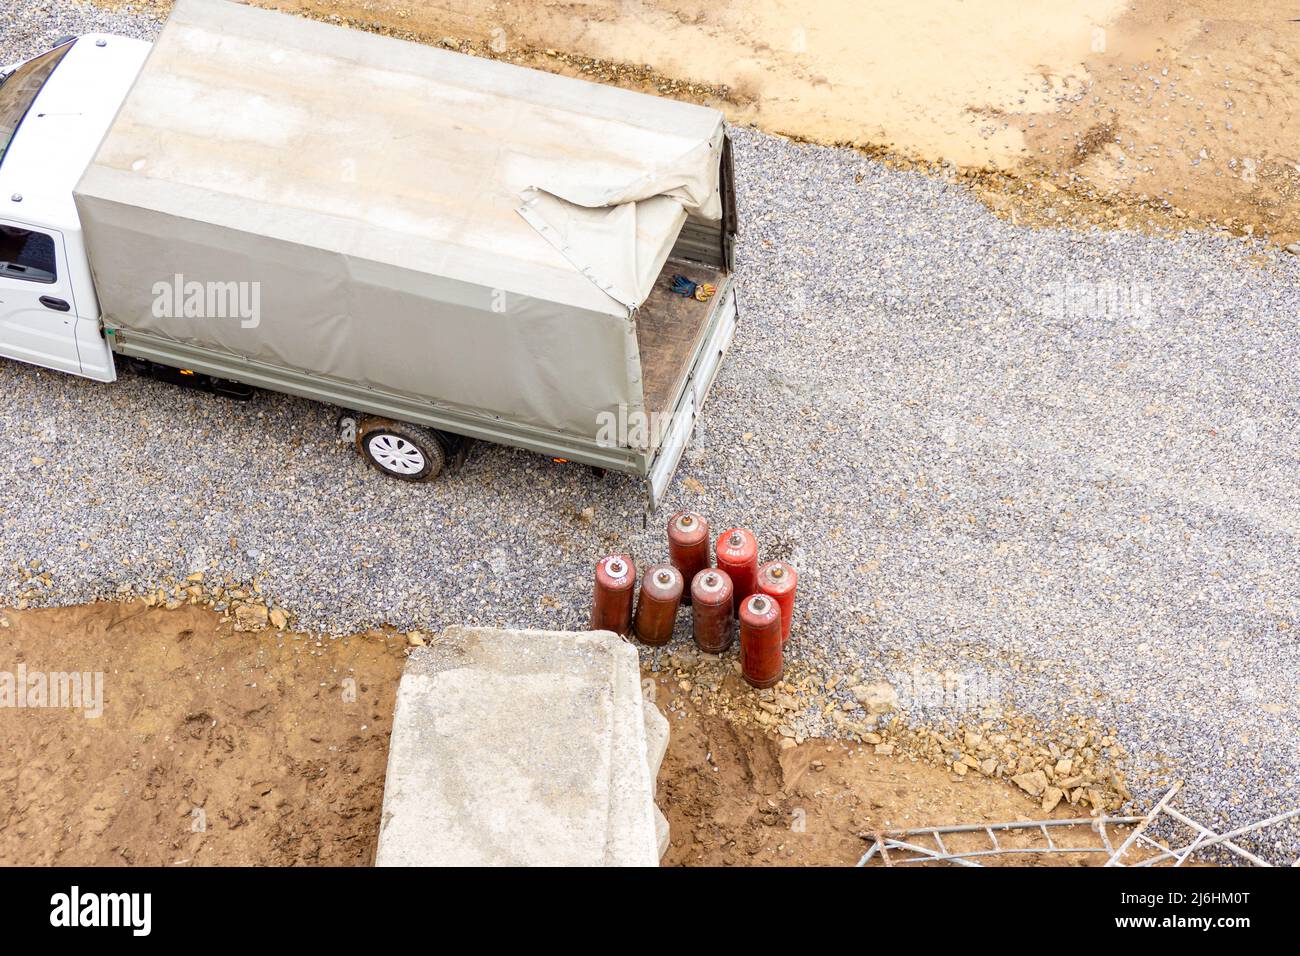 A small truck with an awning on the body stands on a construction site near several red gas cylinders - propane, selective focus Stock Photo